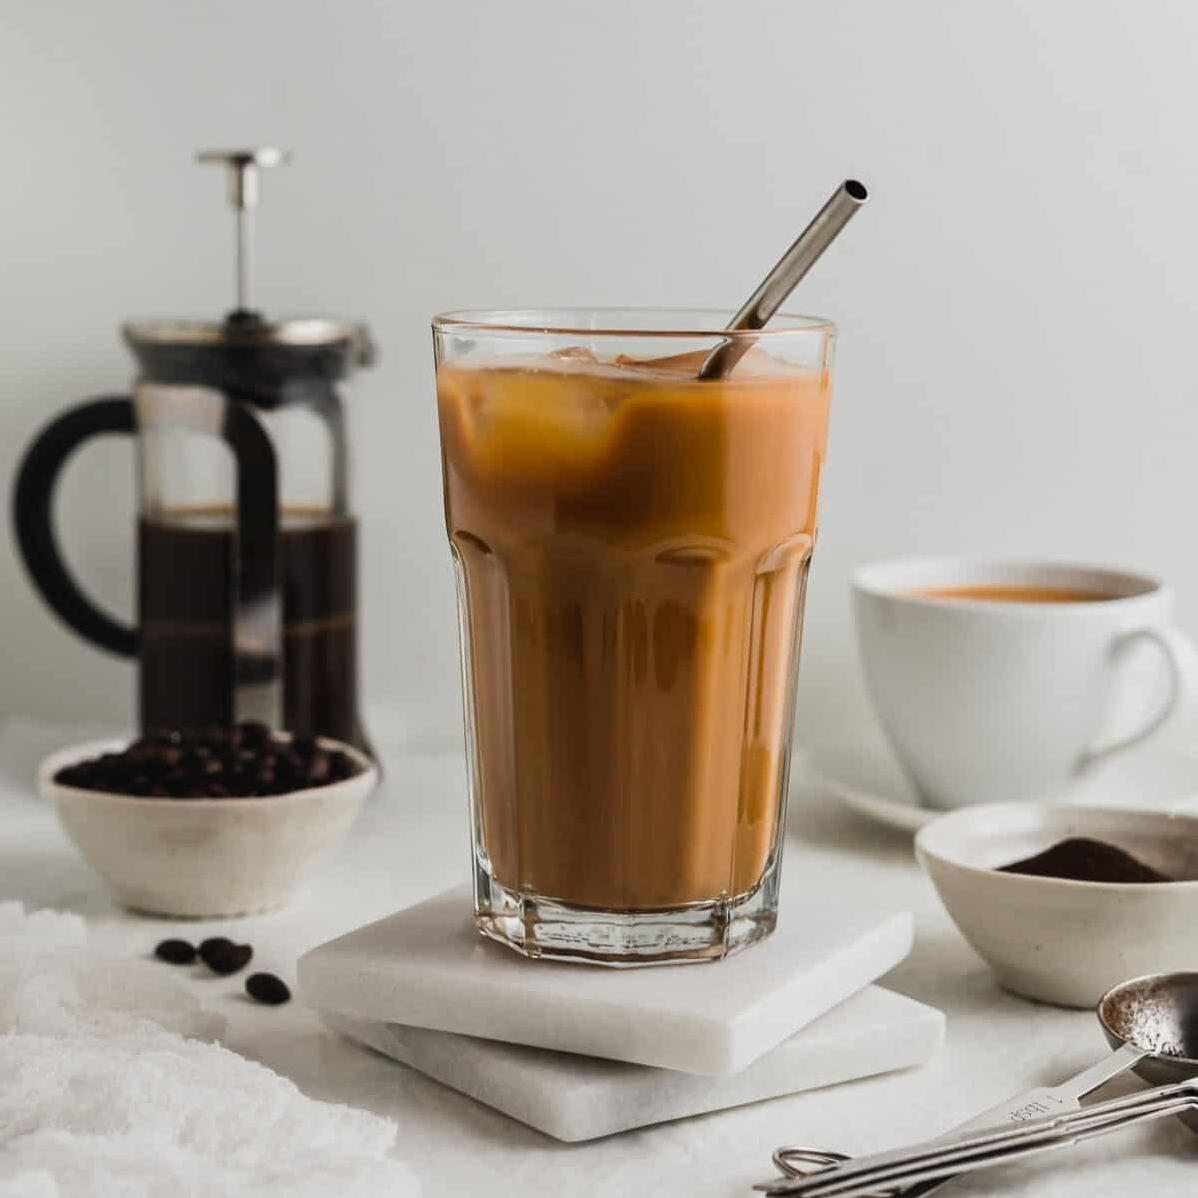  Start your day on a sweet note with this Coffee & Milk Tea Mix recipe!